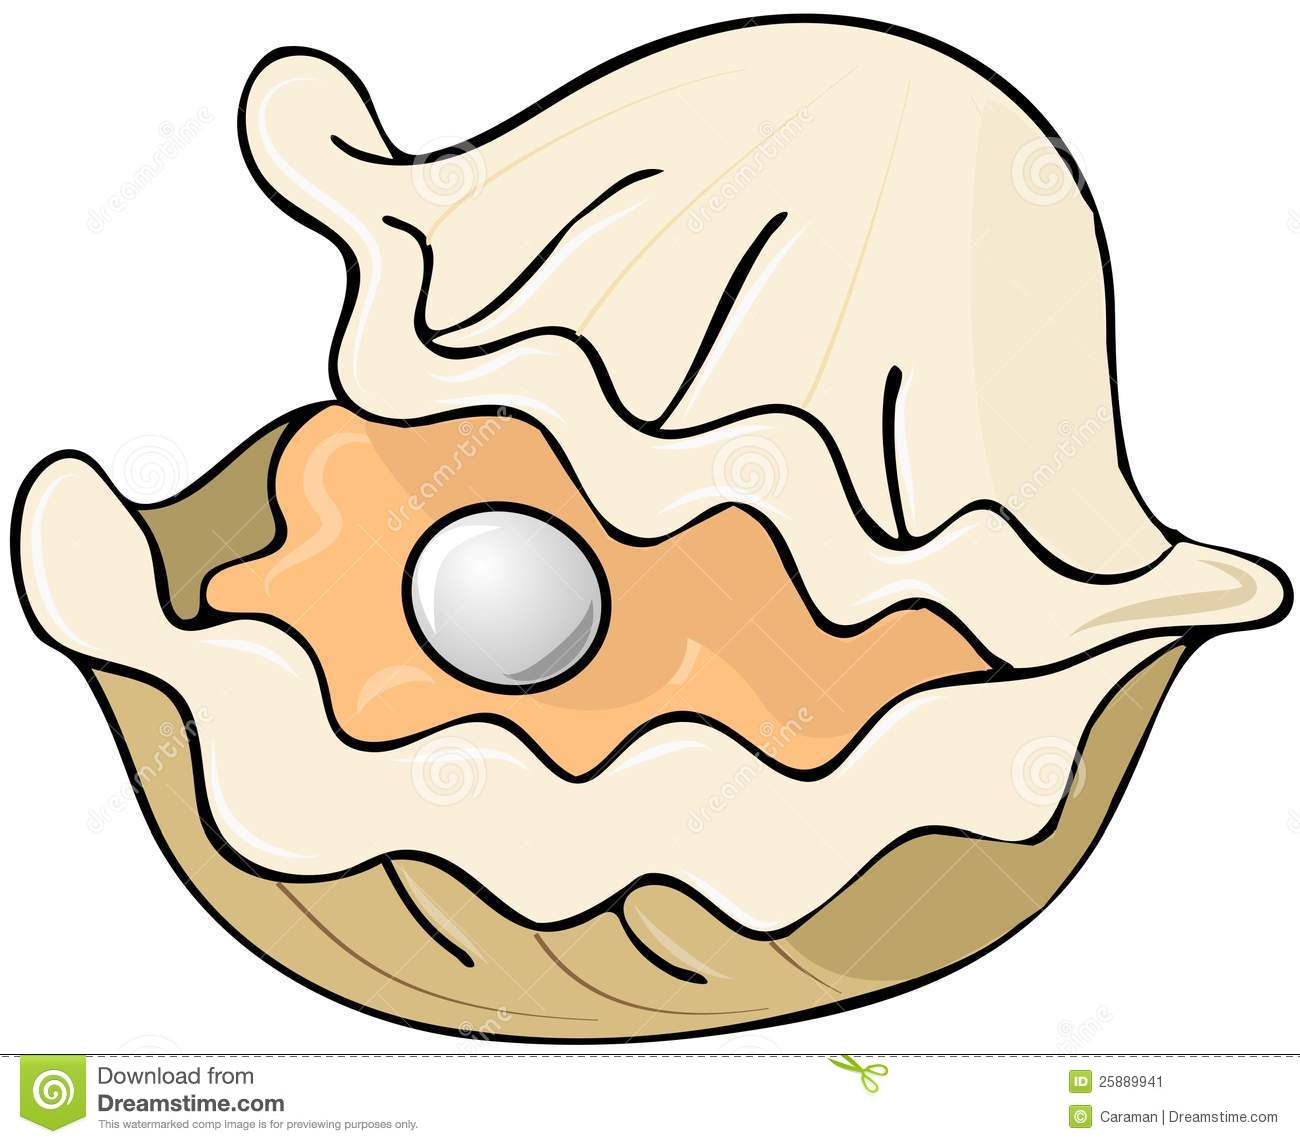 Oysters clipart - Clipground